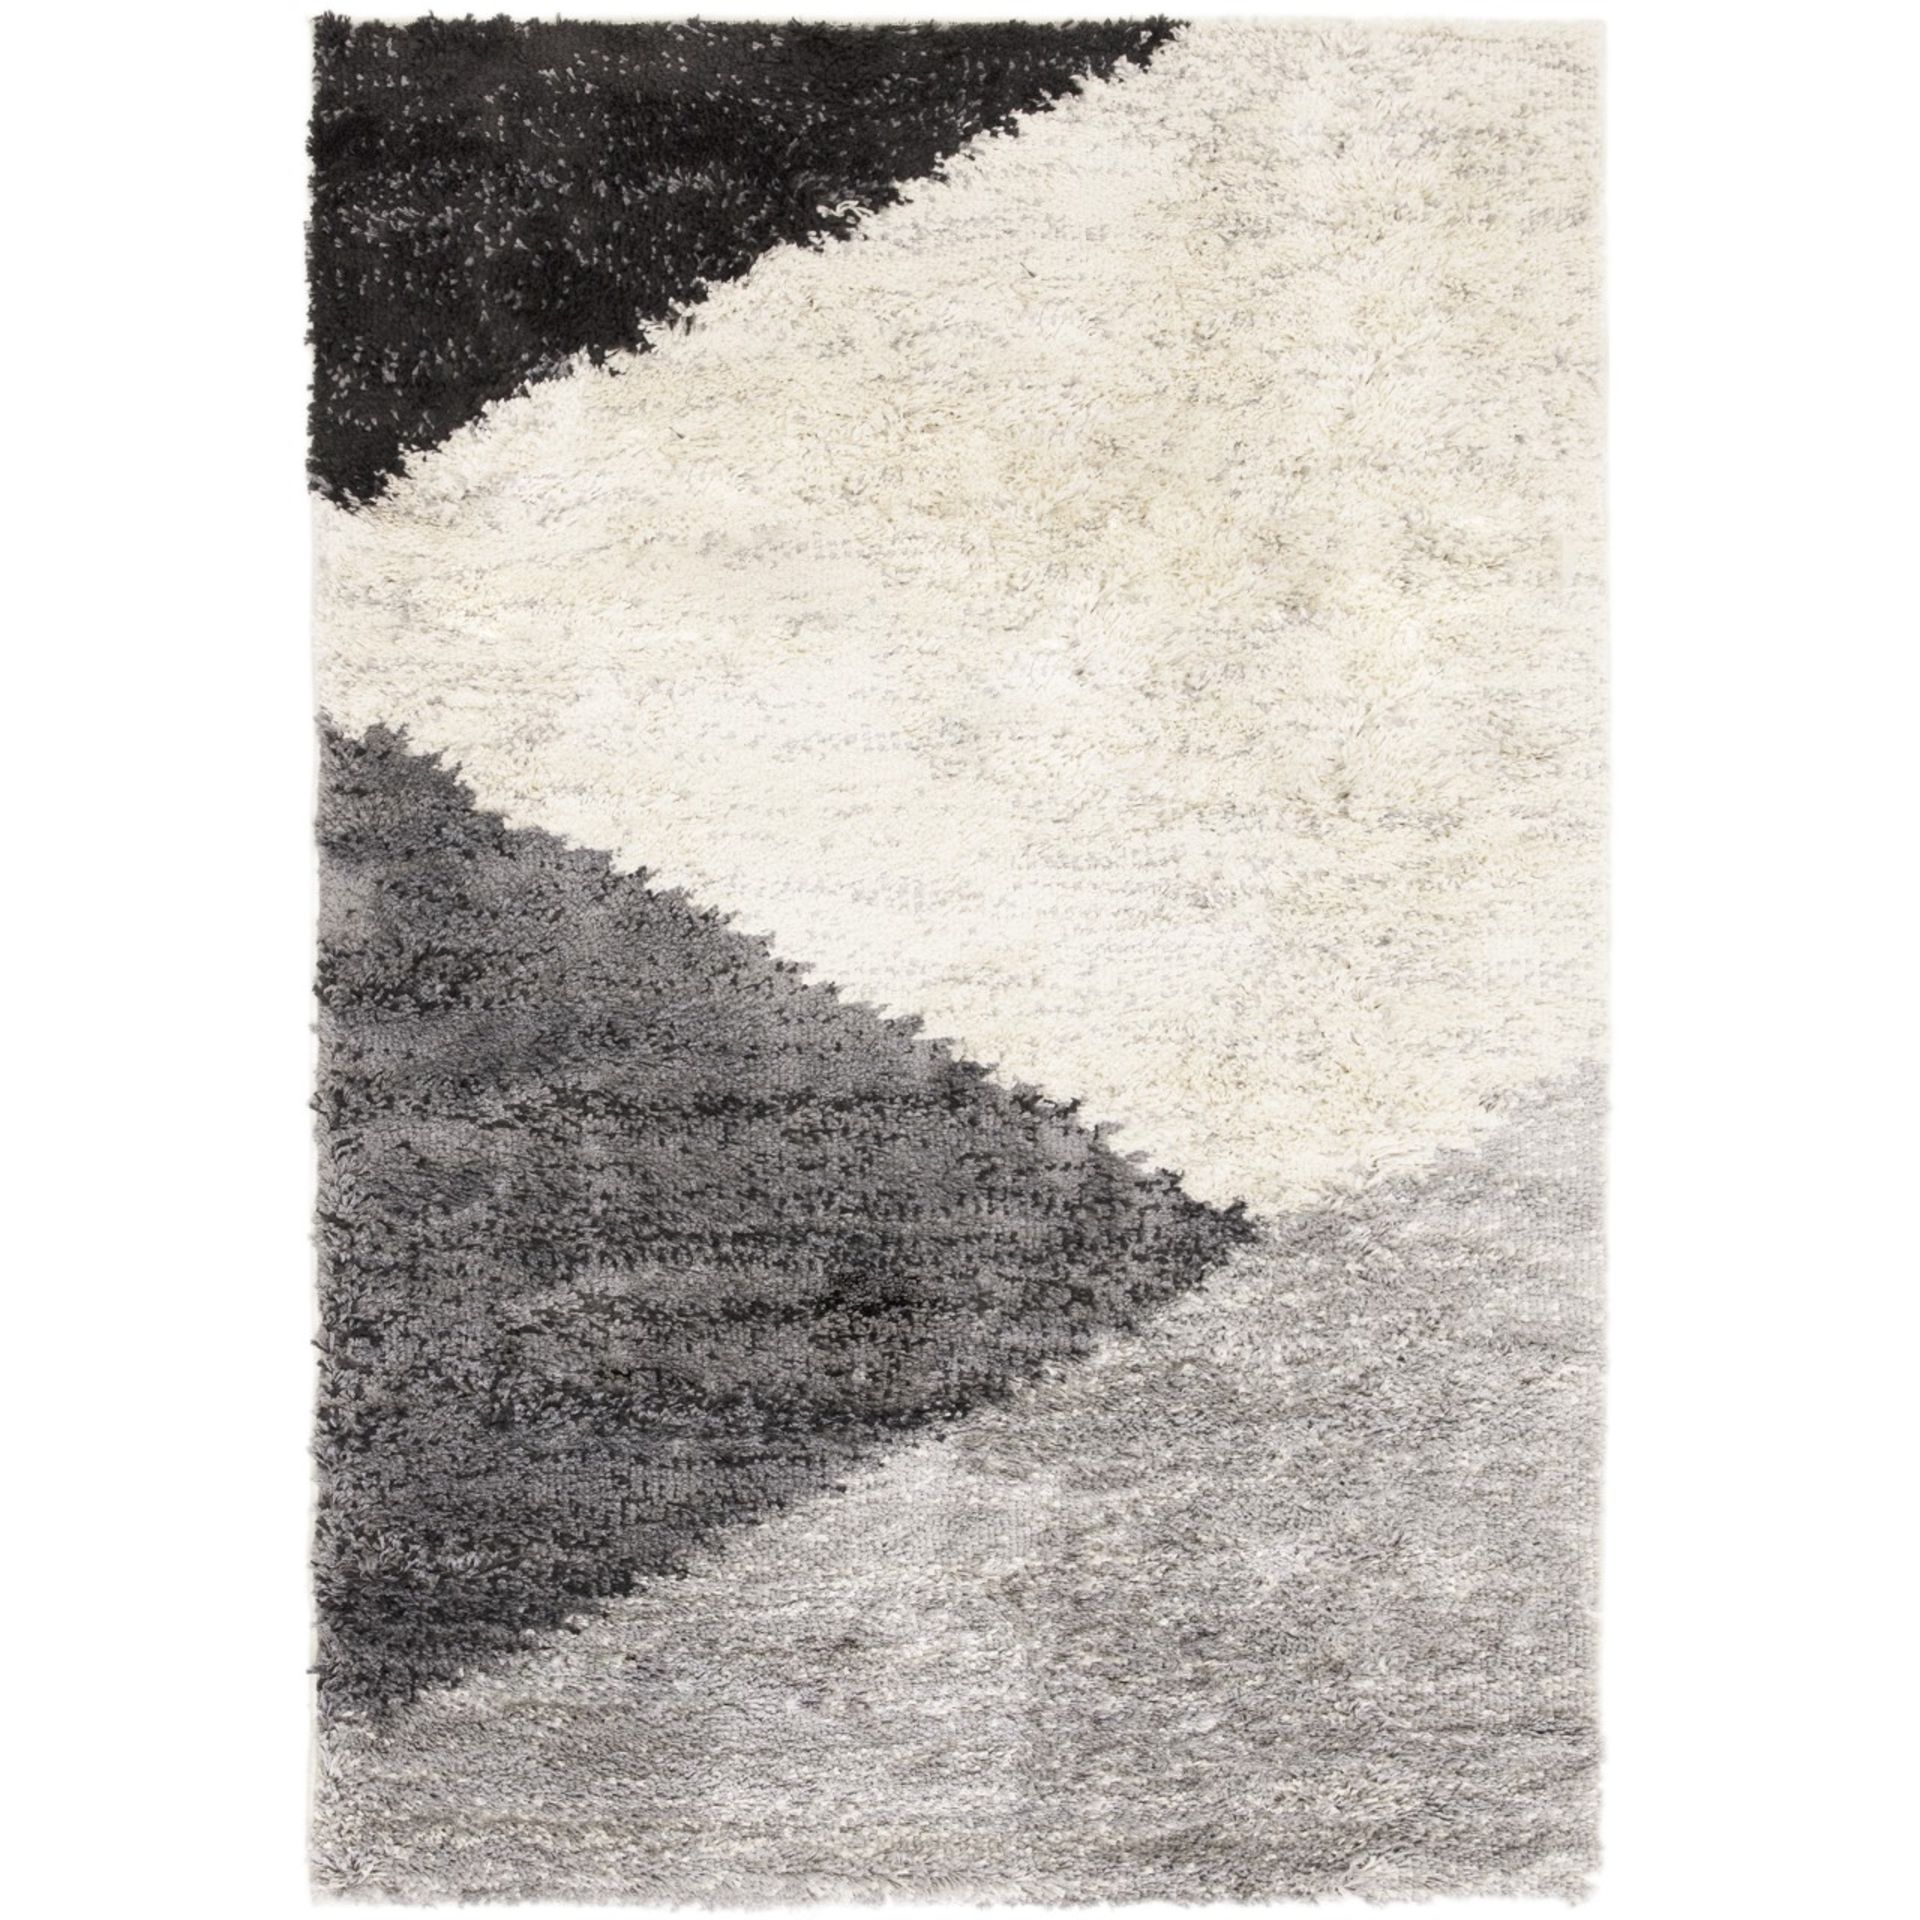 New Nordic 110x160cm Charcoal - 100% Polypropylene - £10 Delivery - Image 2 of 3